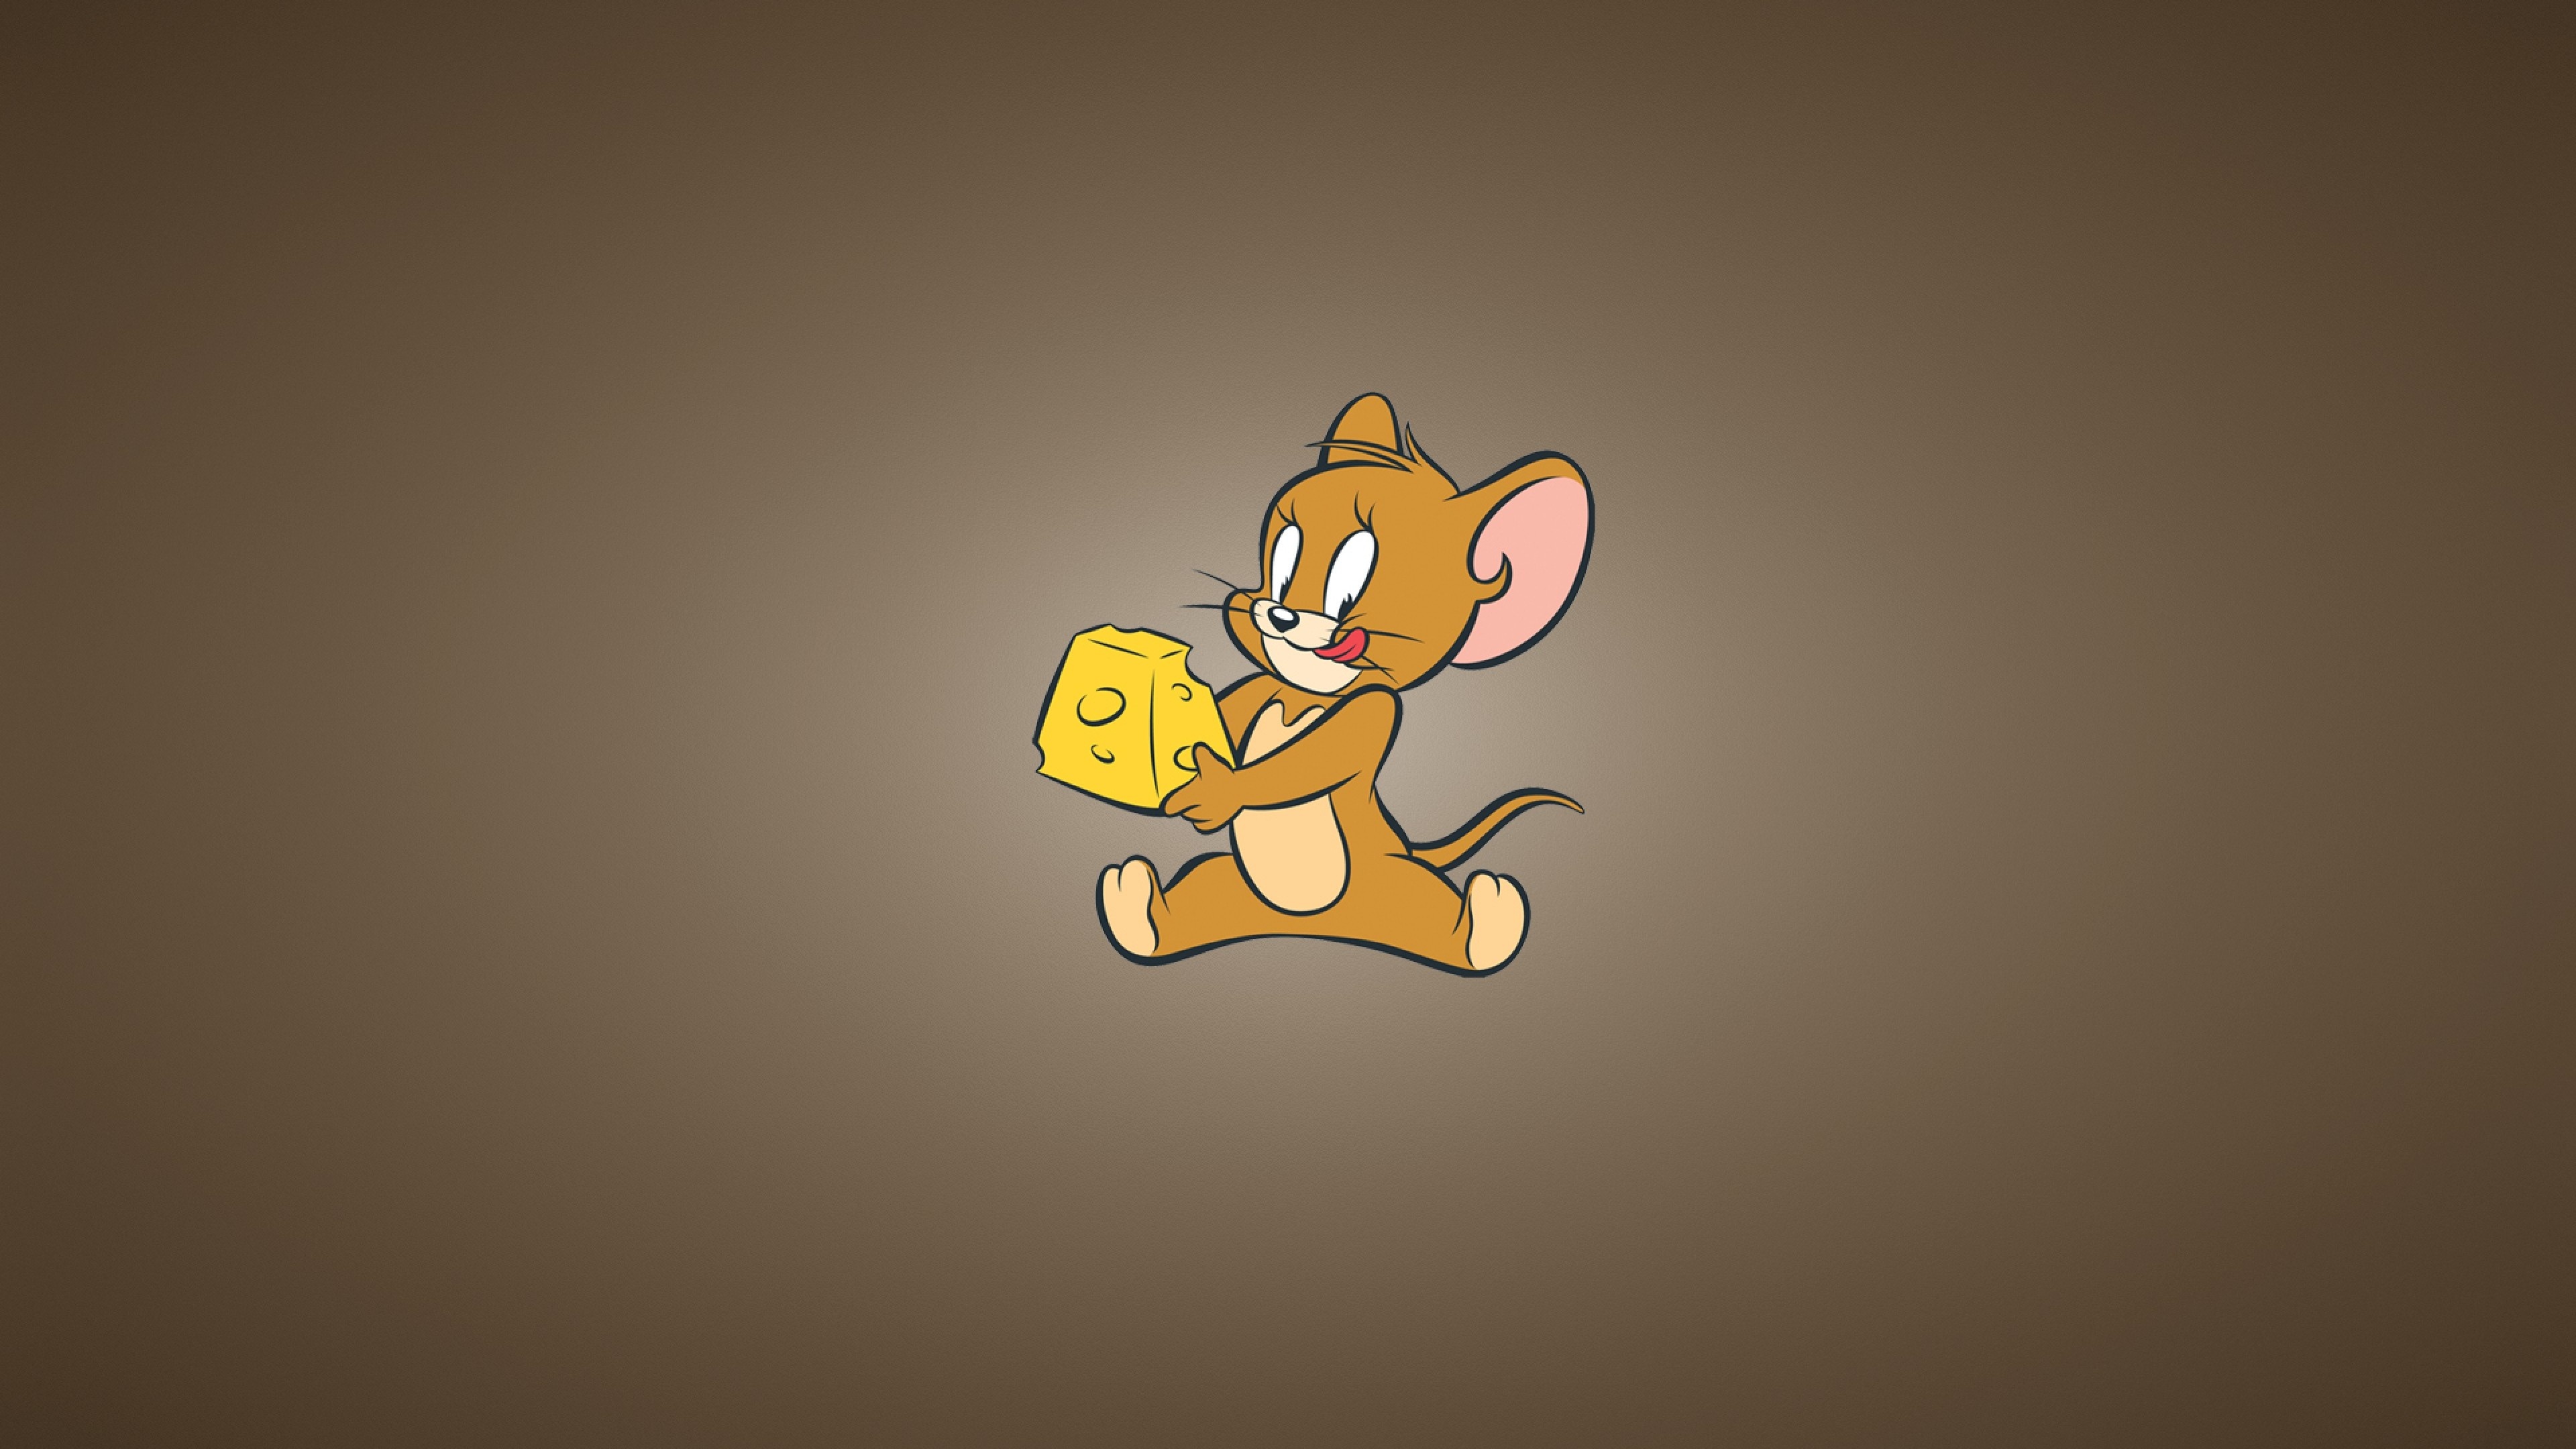 Tom and Jerry 1280x1024, High definition, Eye-catching wallpaper, Animated fun, 3840x2160 4K Desktop